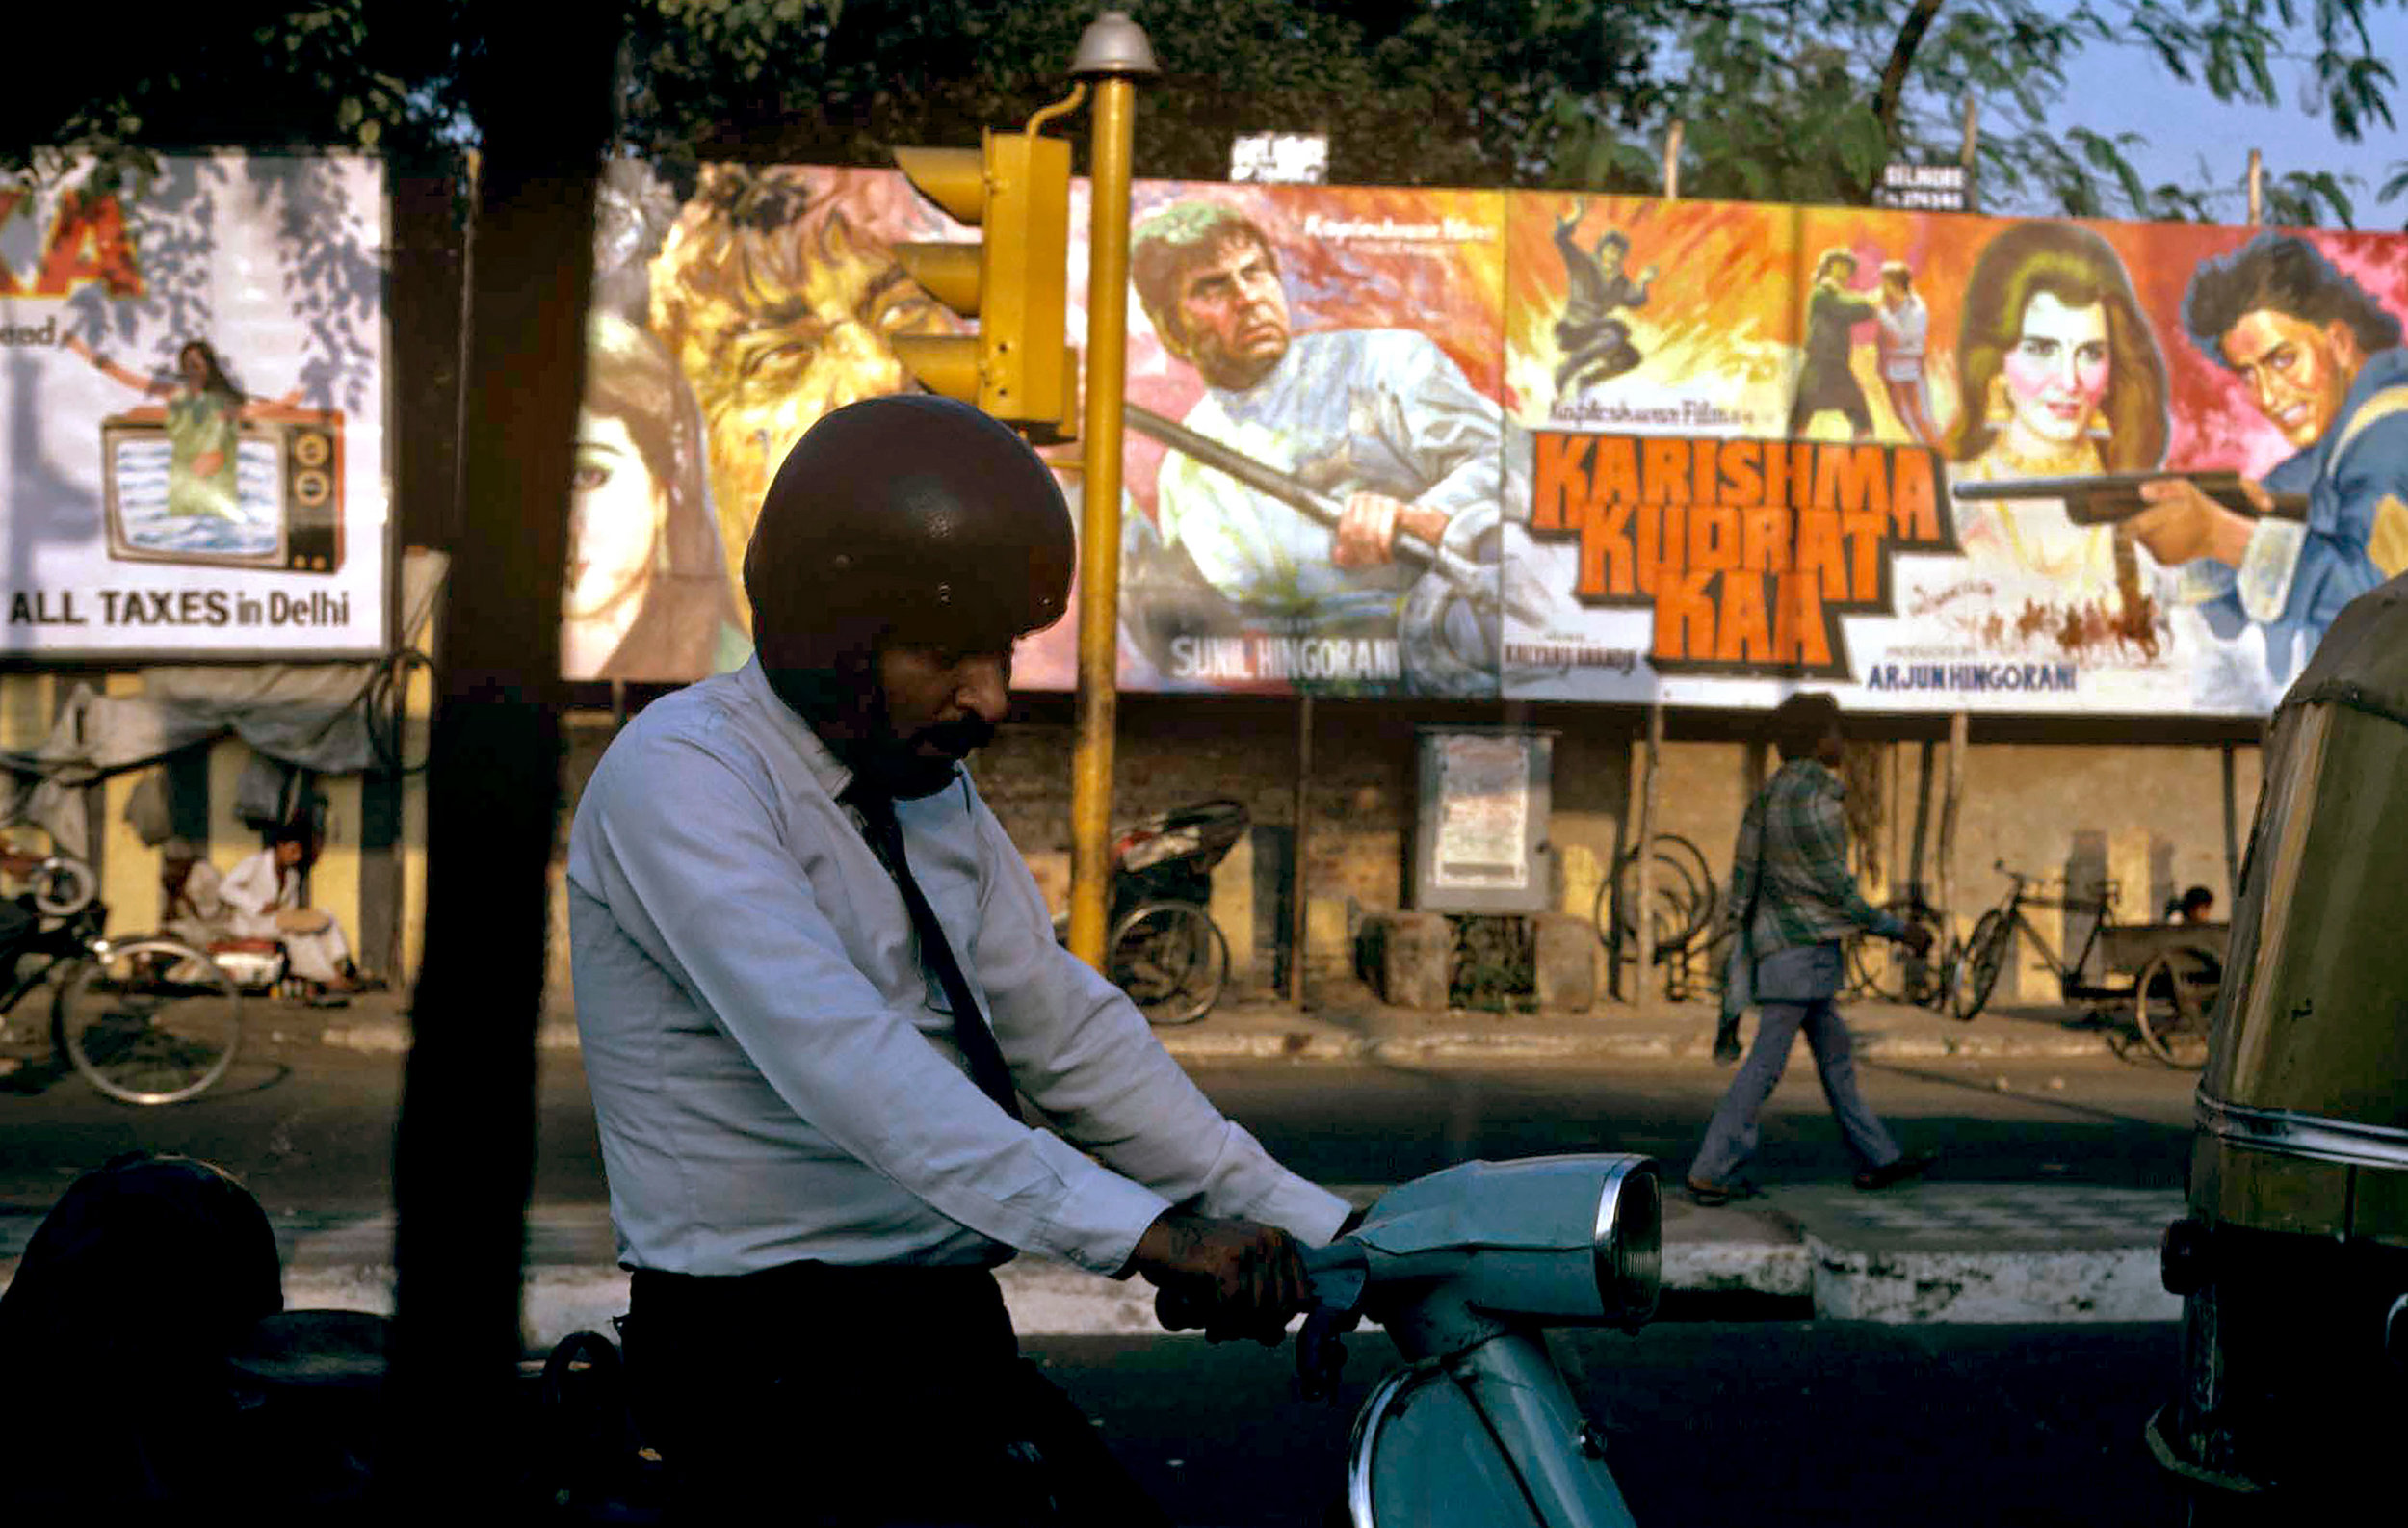 Man on Scooter / New Delhi, India